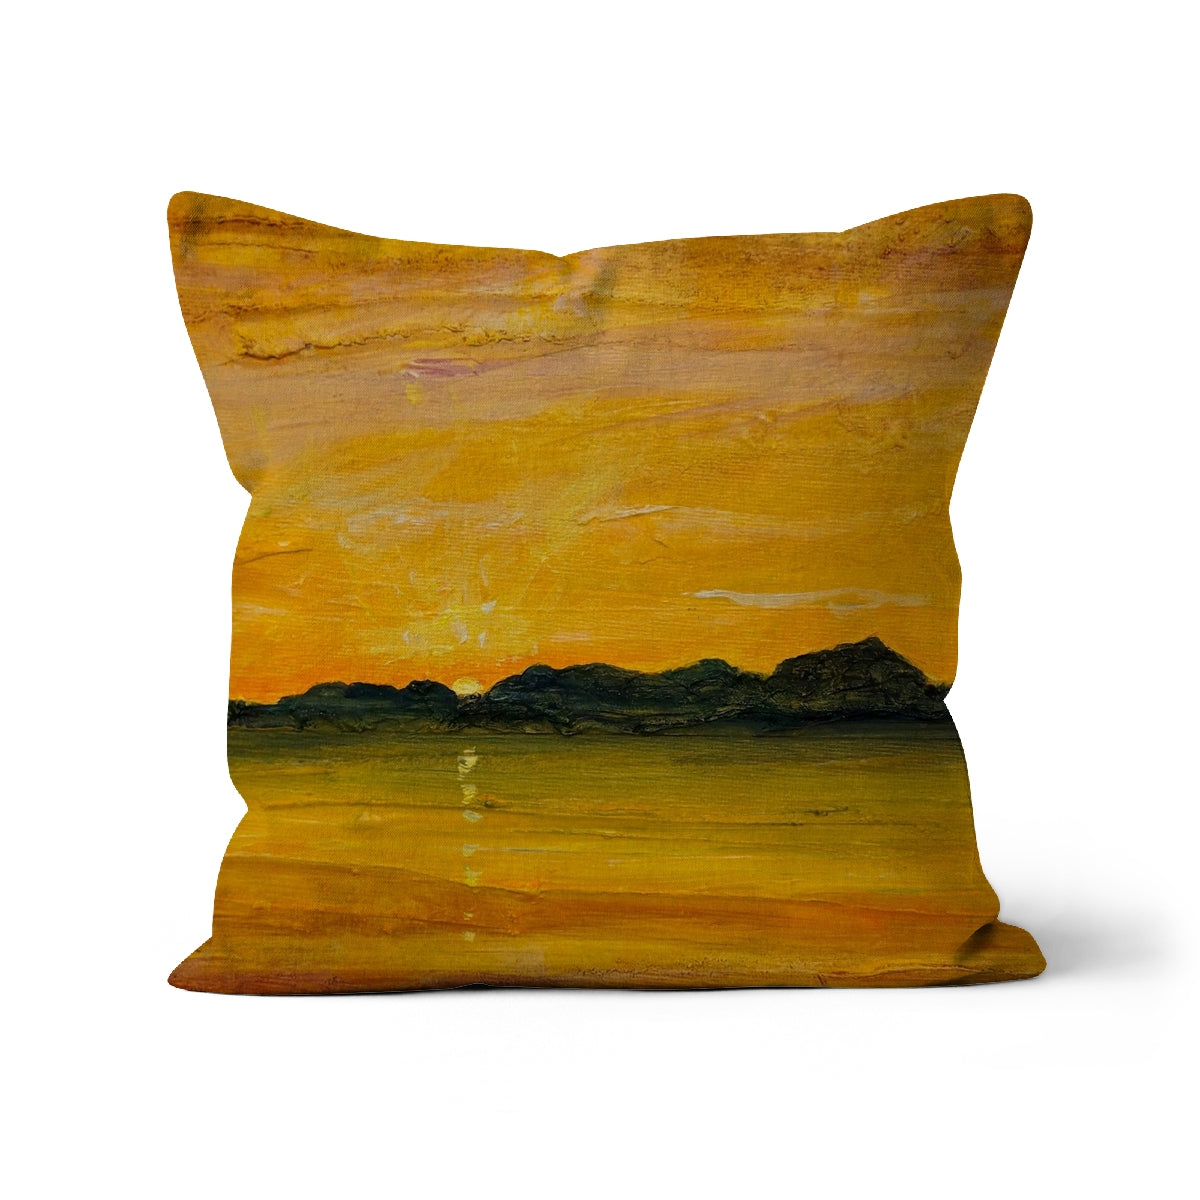 Jura Sunset Art Gifts Cushion-Cushions-Hebridean Islands Art Gallery-Faux Suede-24"x24"-Paintings, Prints, Homeware, Art Gifts From Scotland By Scottish Artist Kevin Hunter